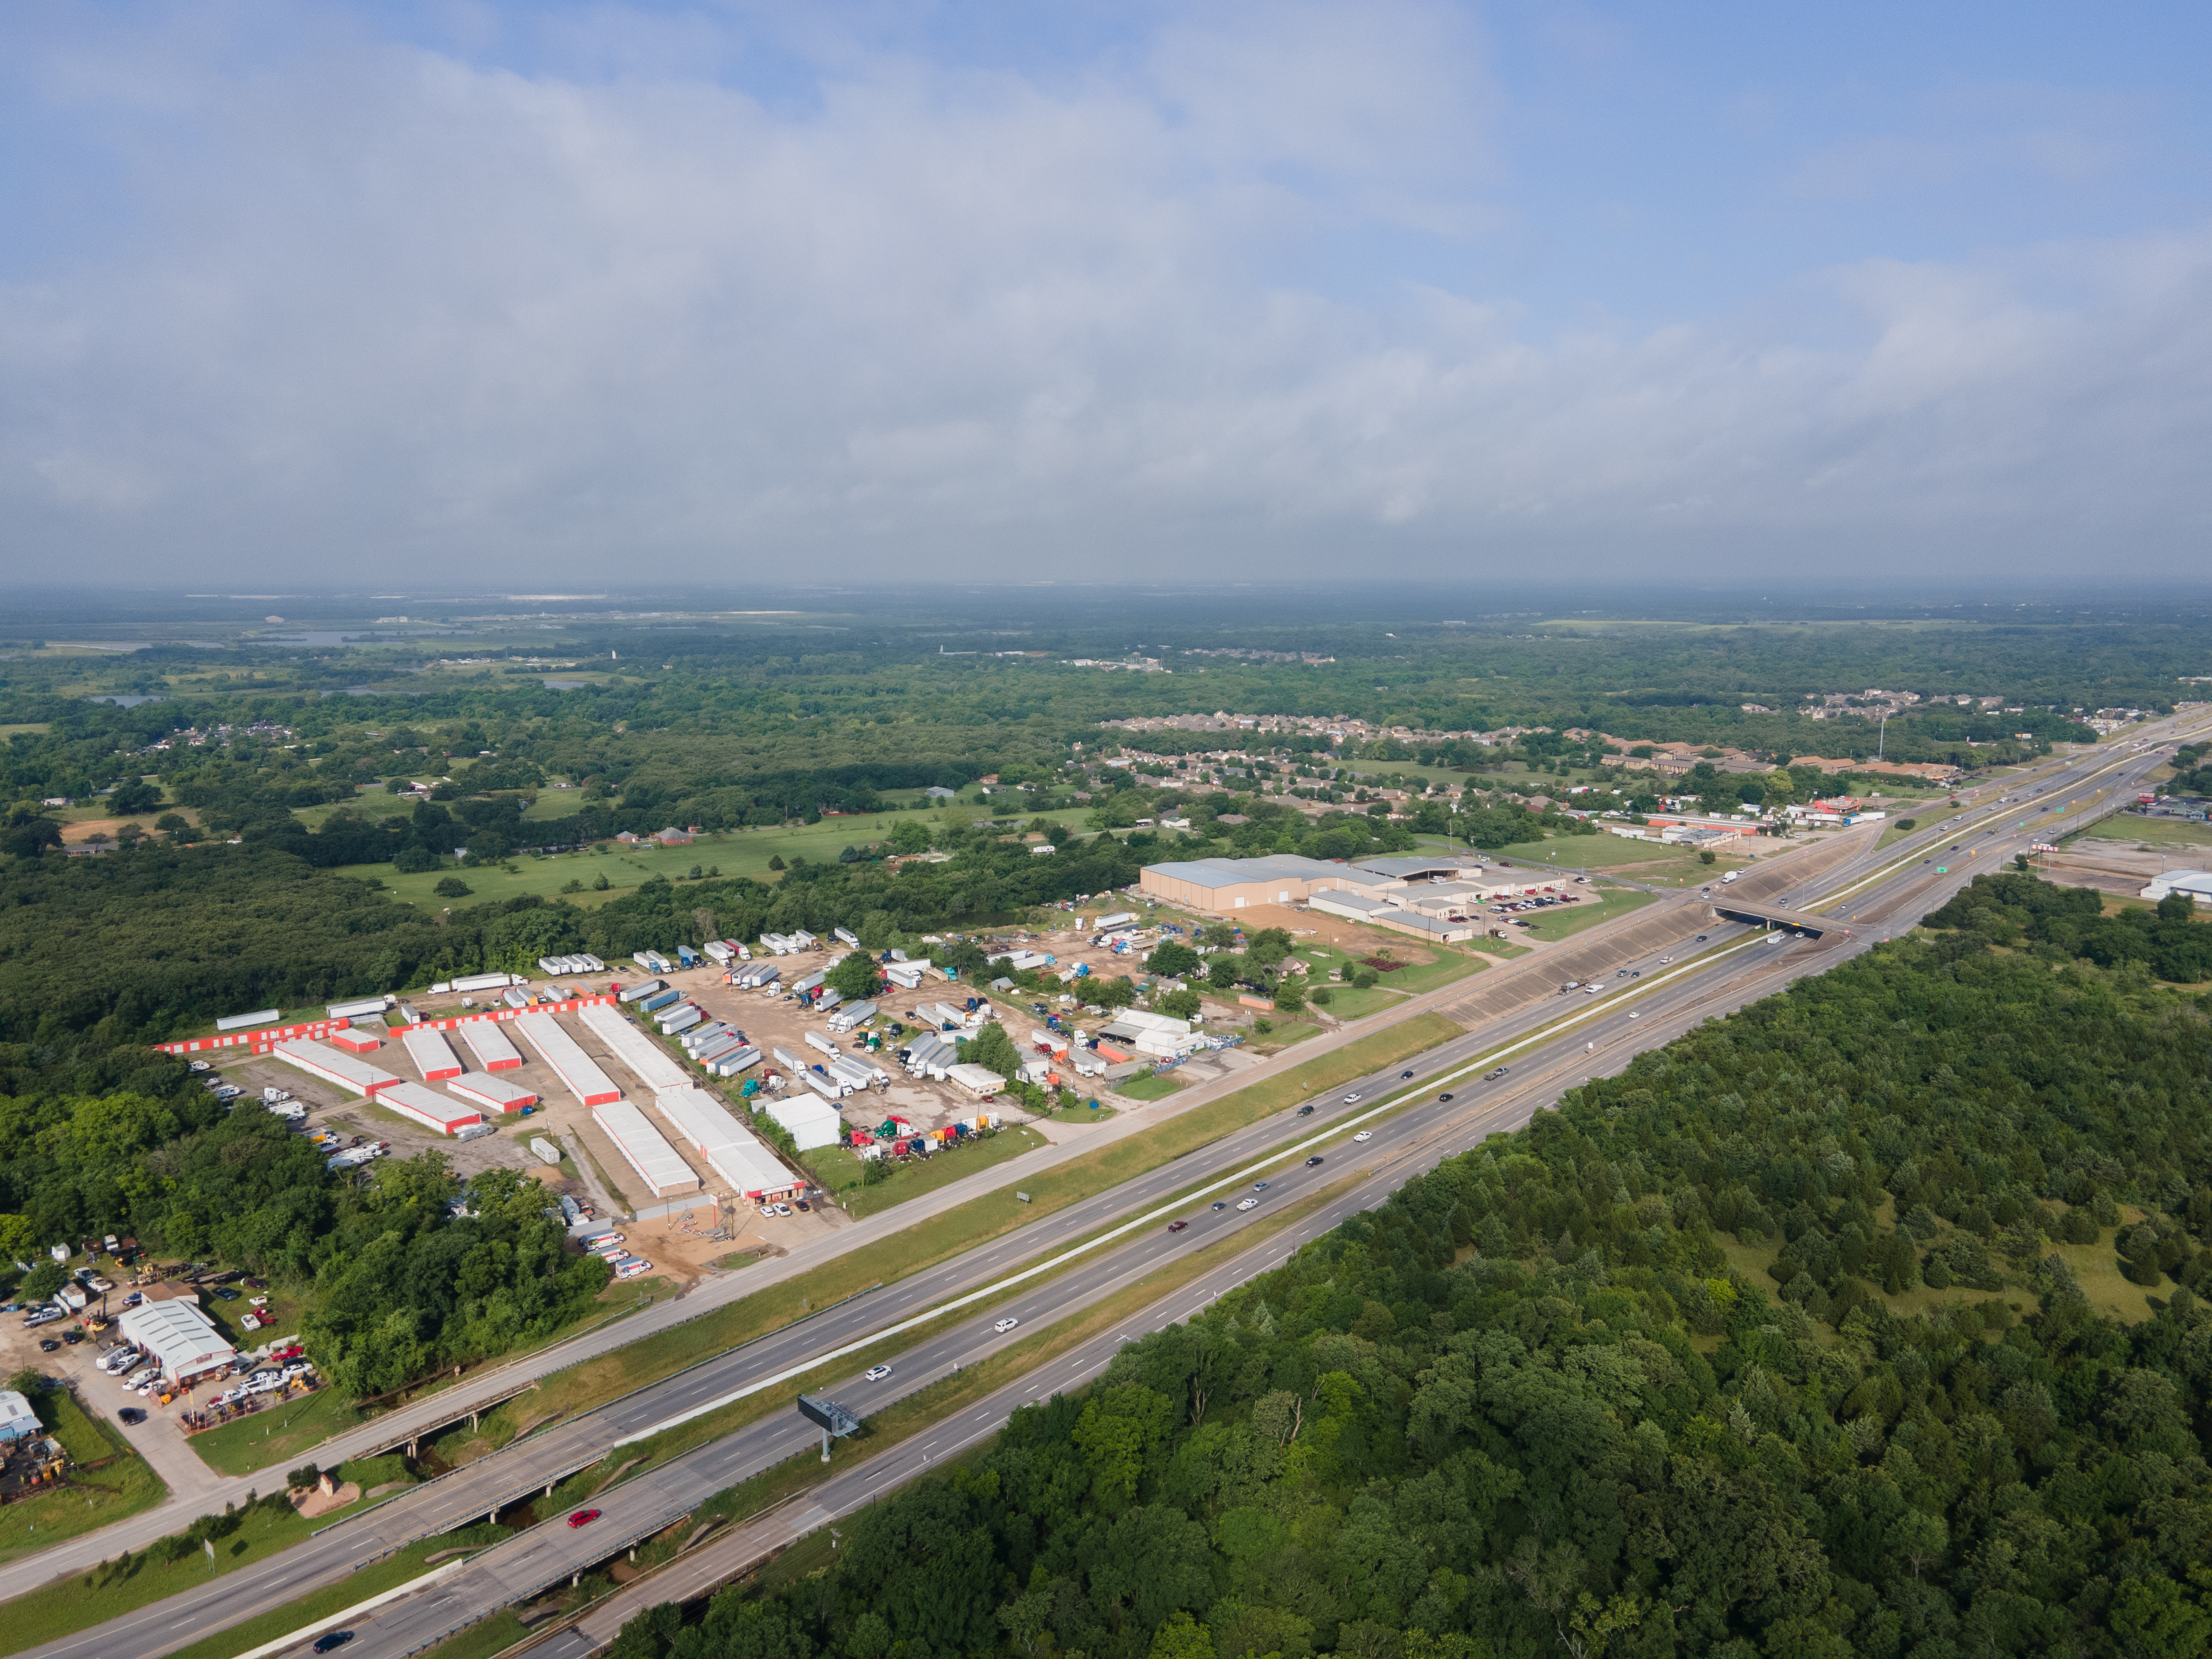 FreeUp Storage Seagoville from above